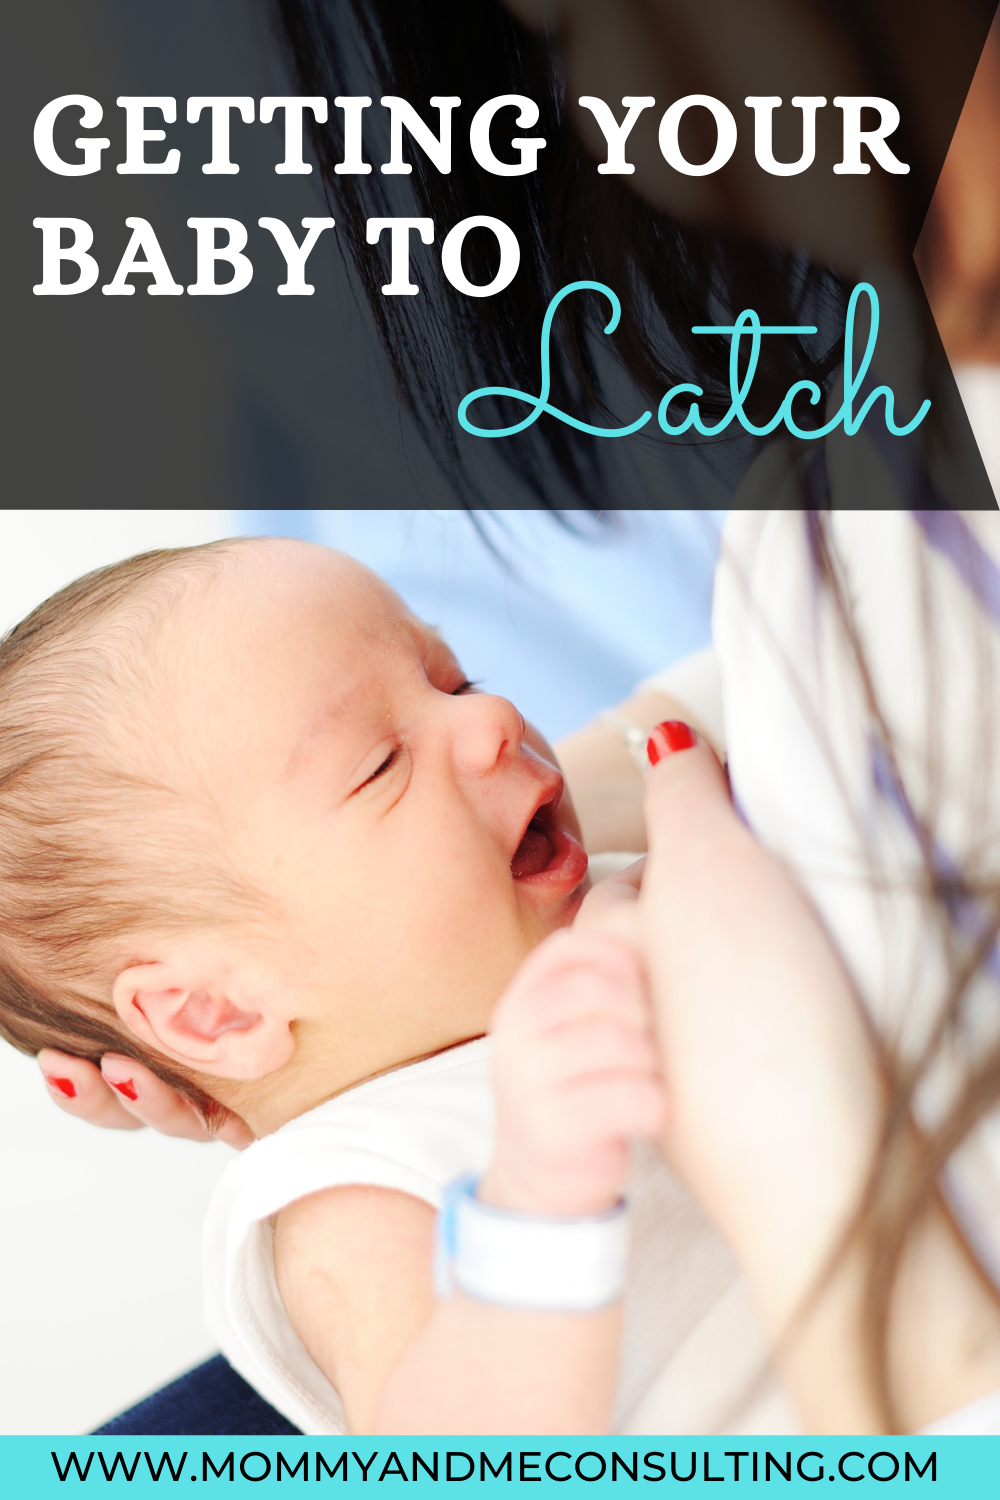 Getting your baby to latch